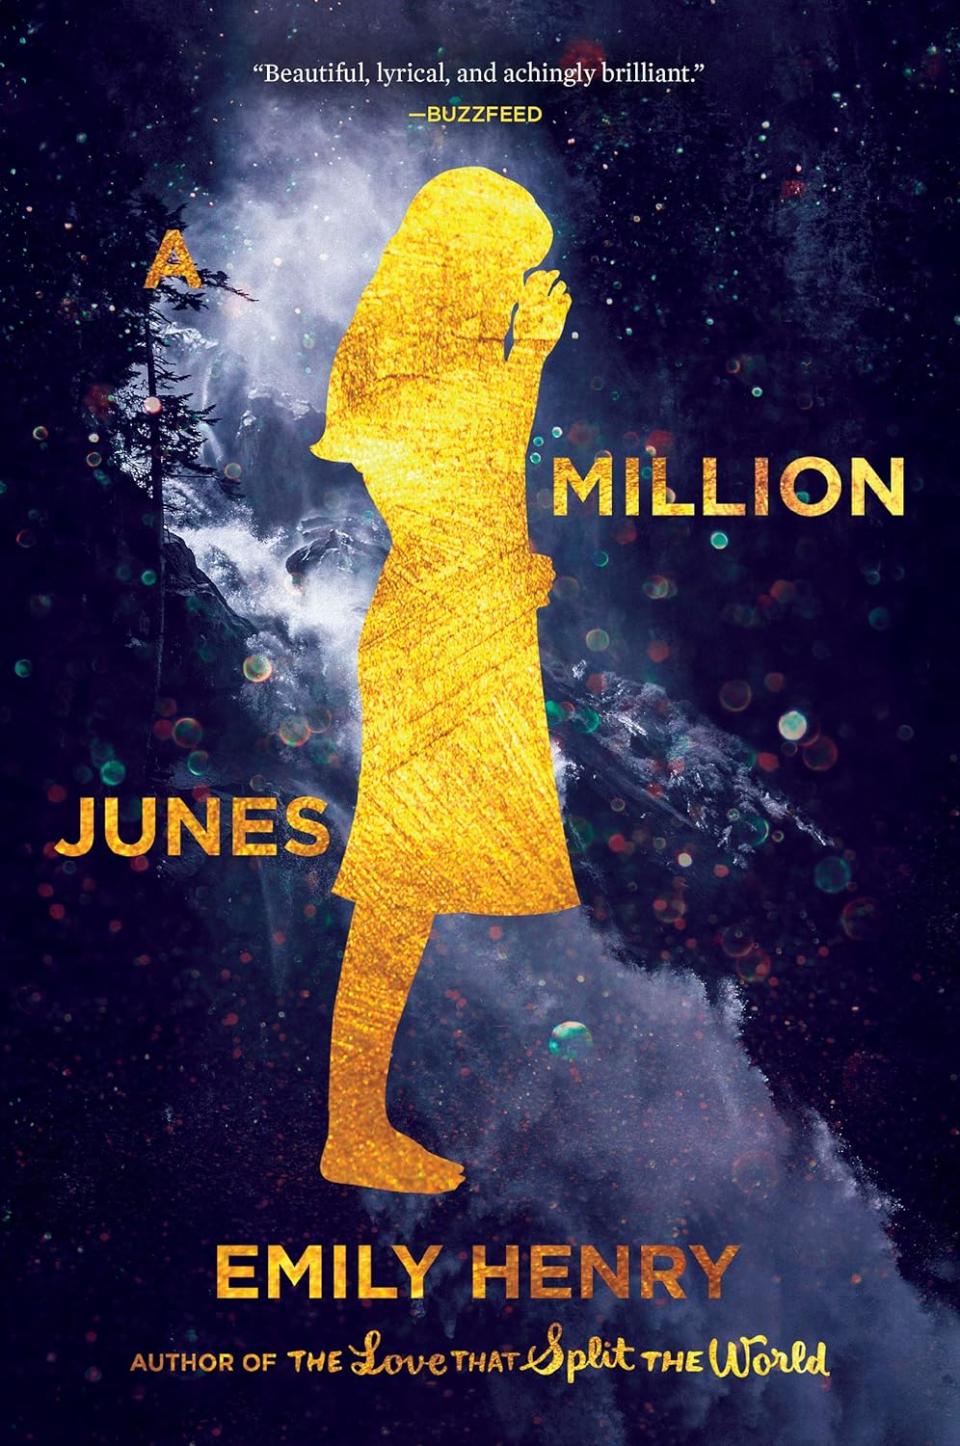 "A Million Junes" (2017) by Emily Henry.